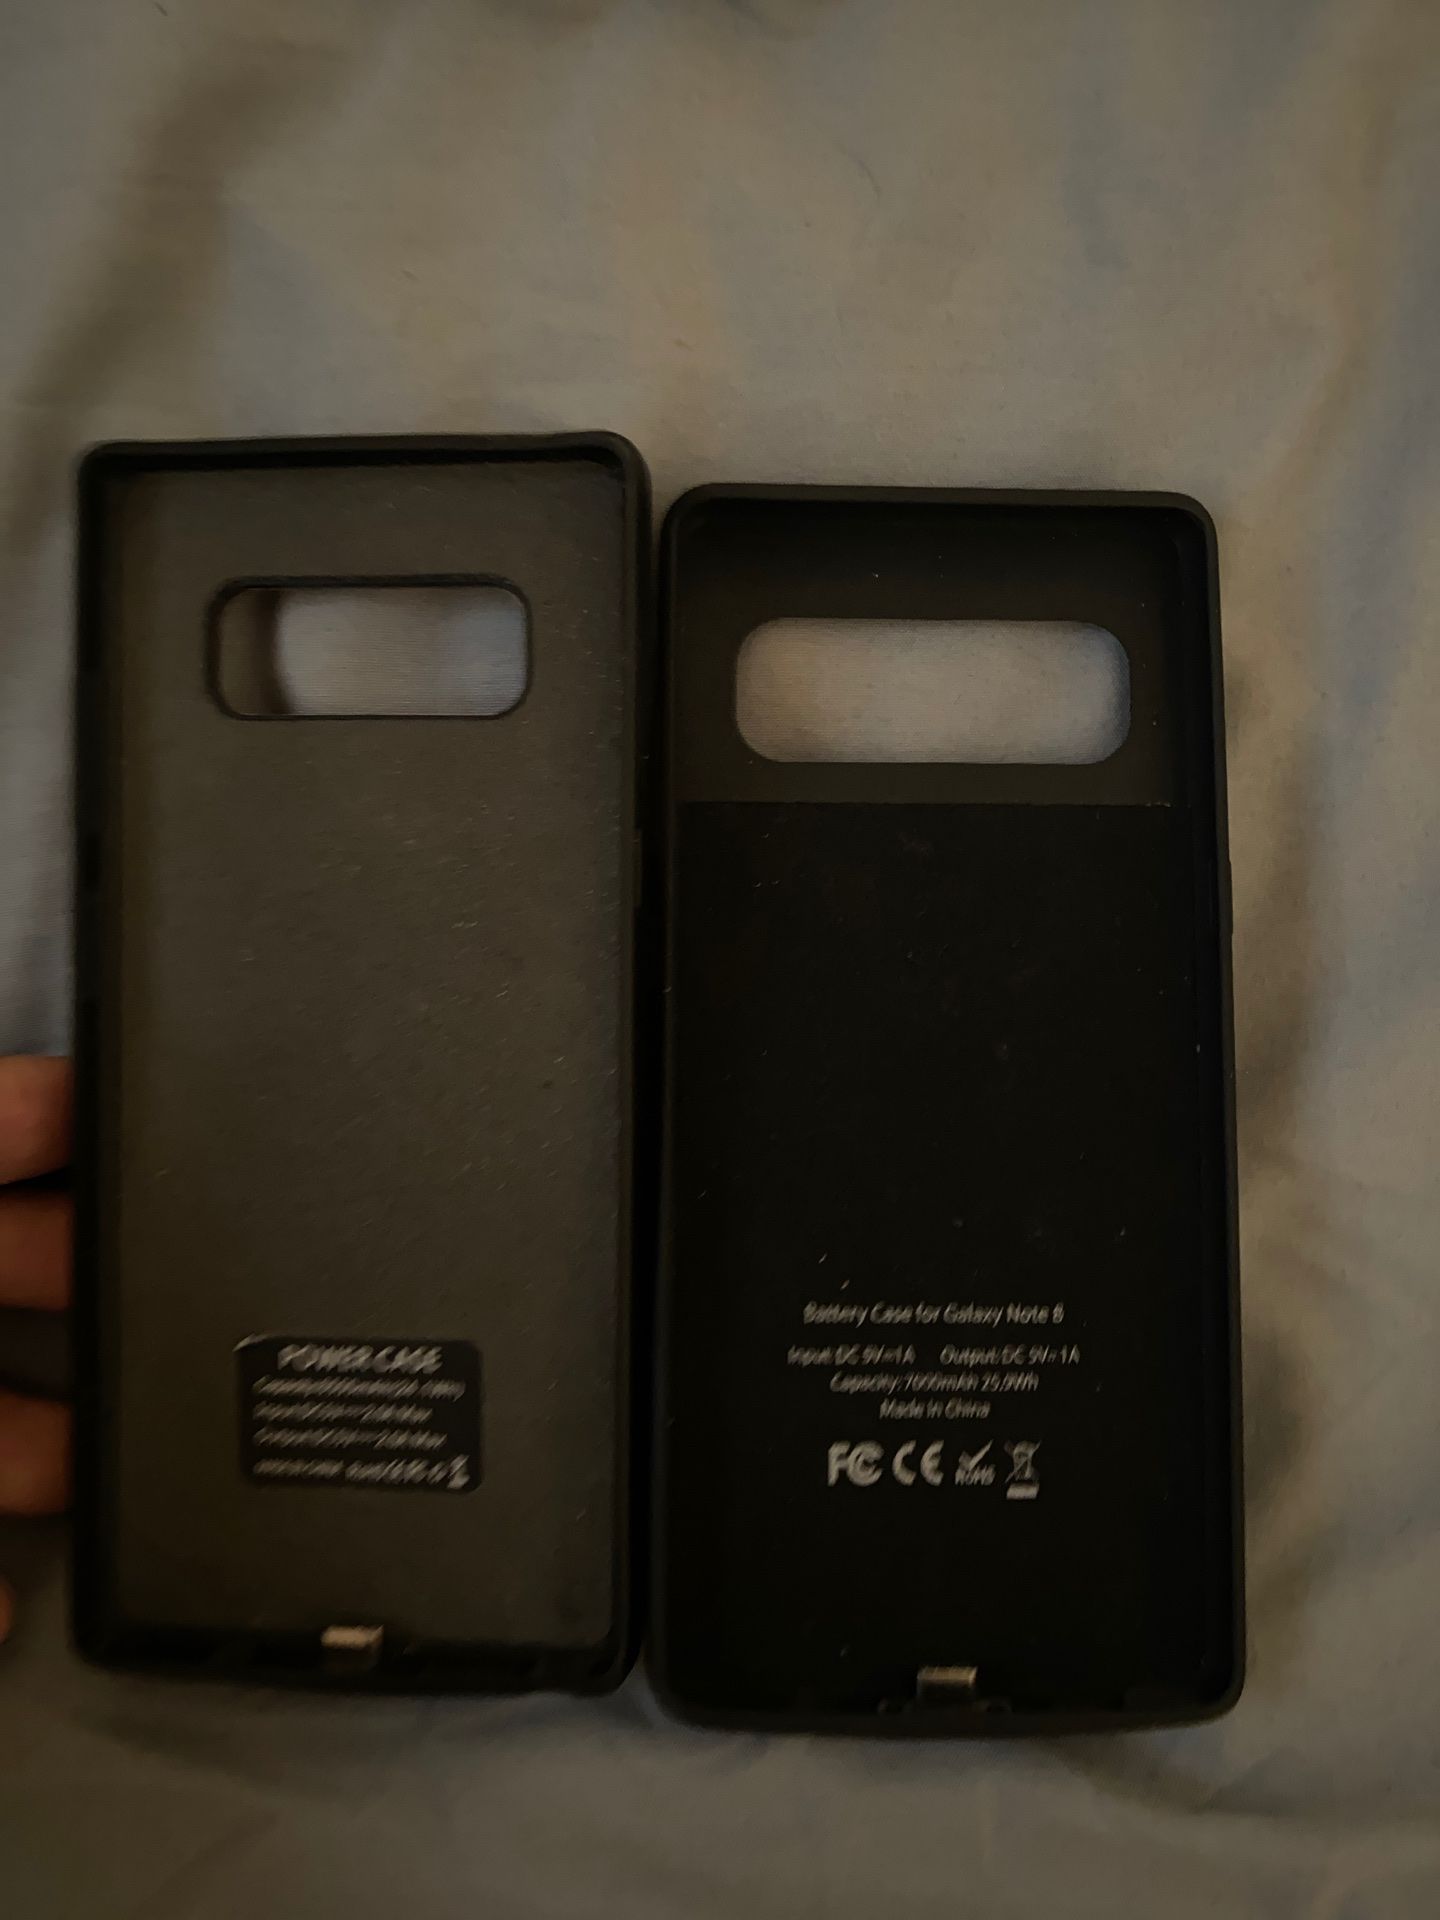 Note 8 charging case